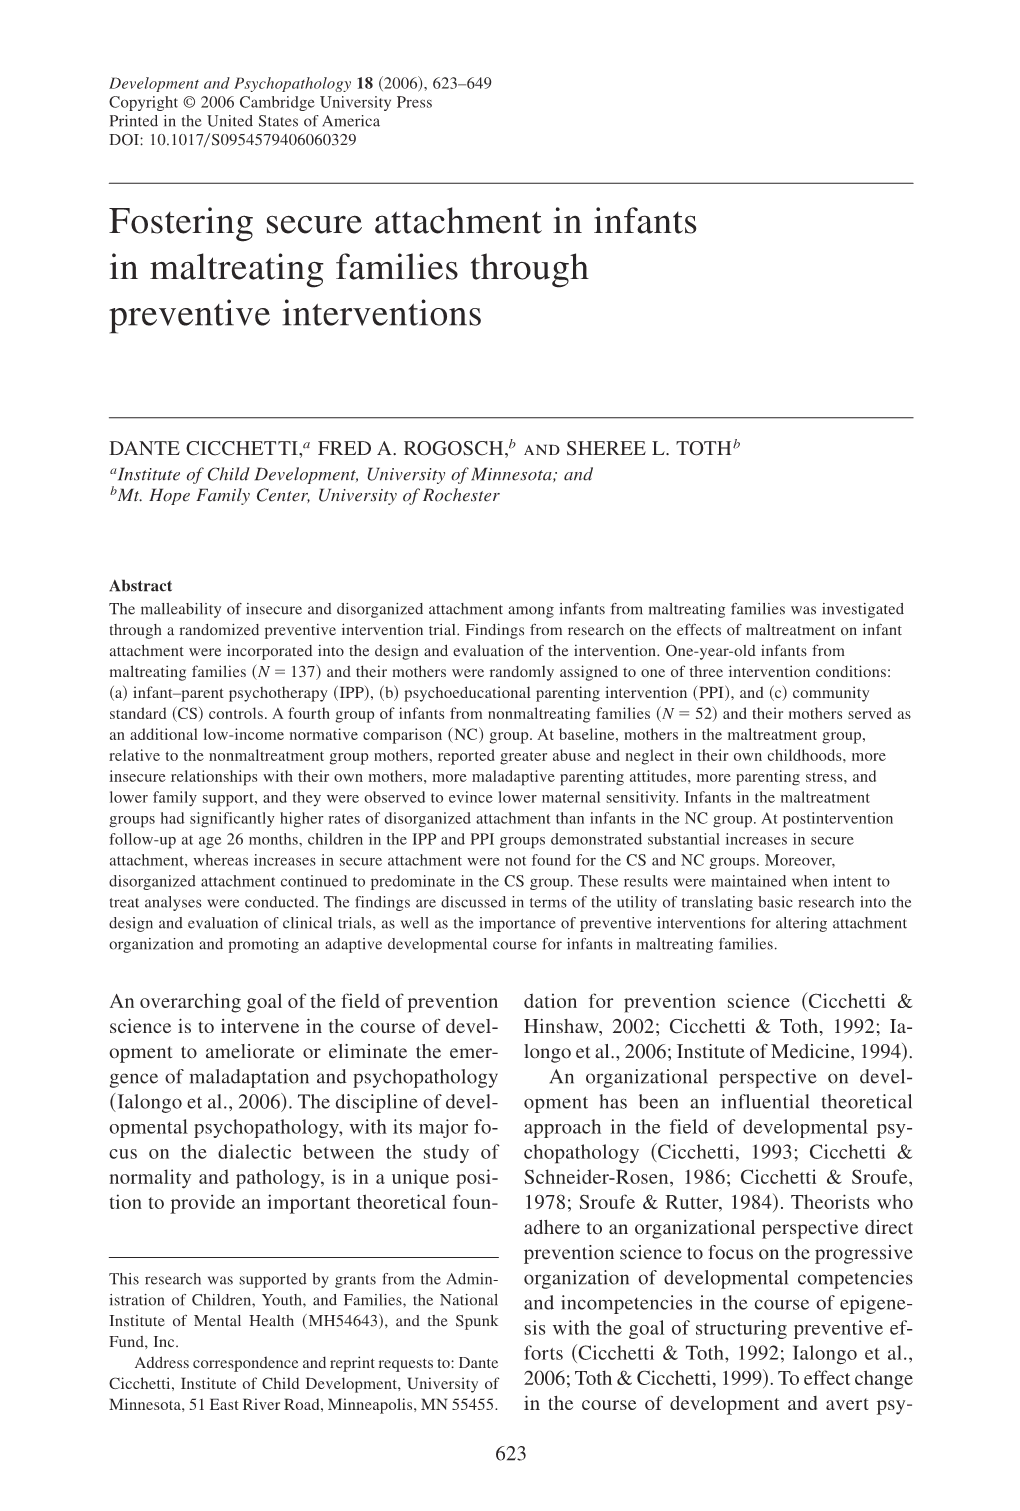 Fostering Secure Attachment in Infants in Maltreating Families Through Preventive Interventions